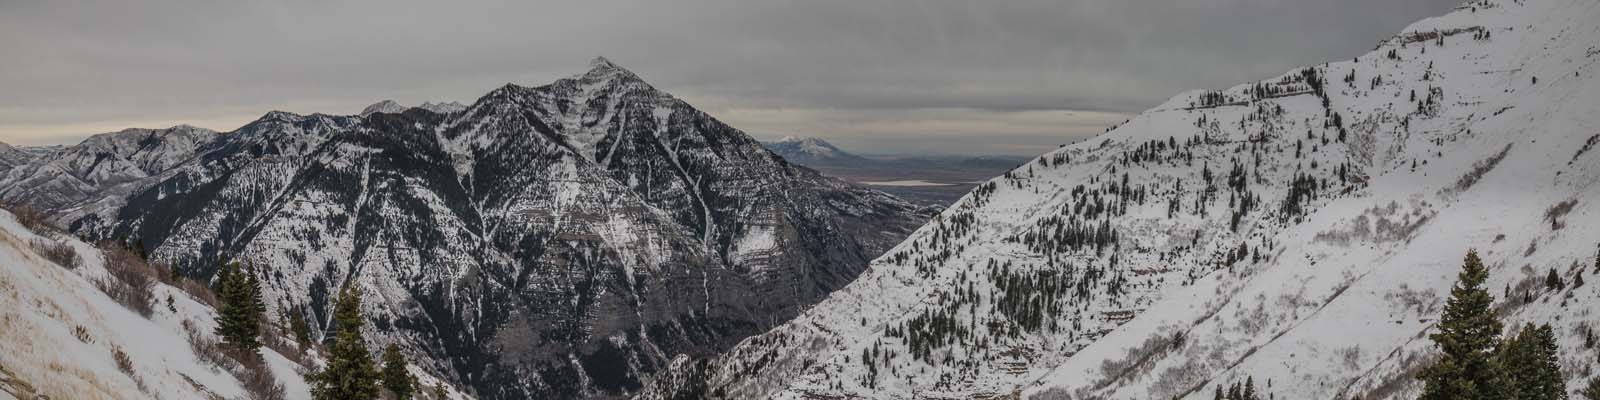 This is an image of snowy mountians in Provo. ASTA-USA provides professional translation services in this city.